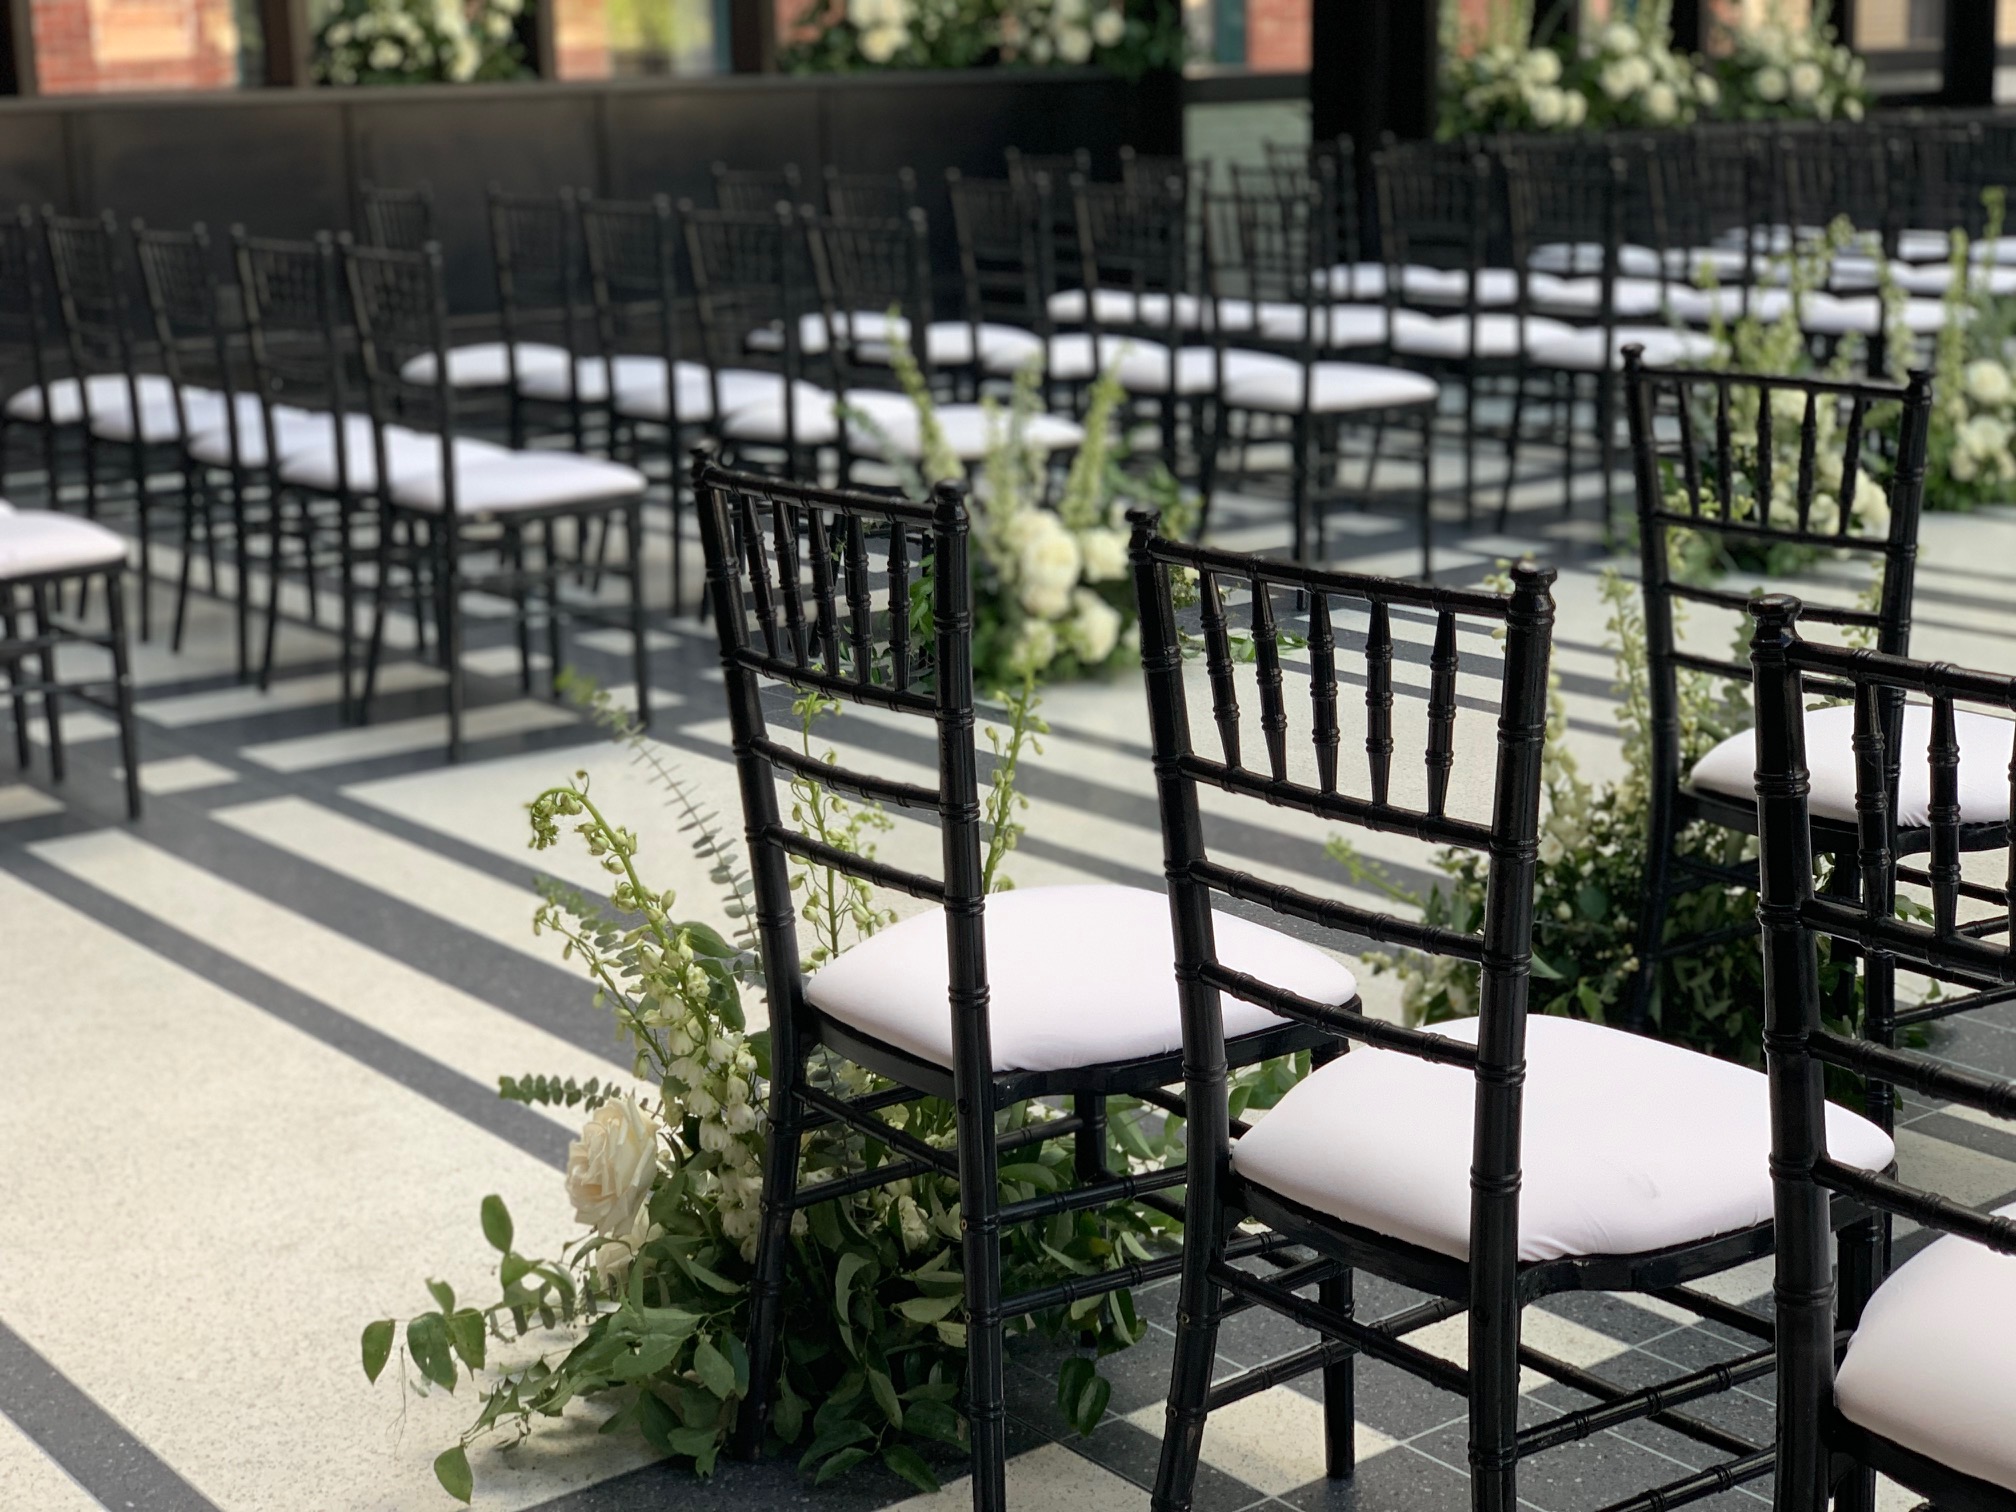 Chairs and flowers at an outdoor wedding are pictured here.